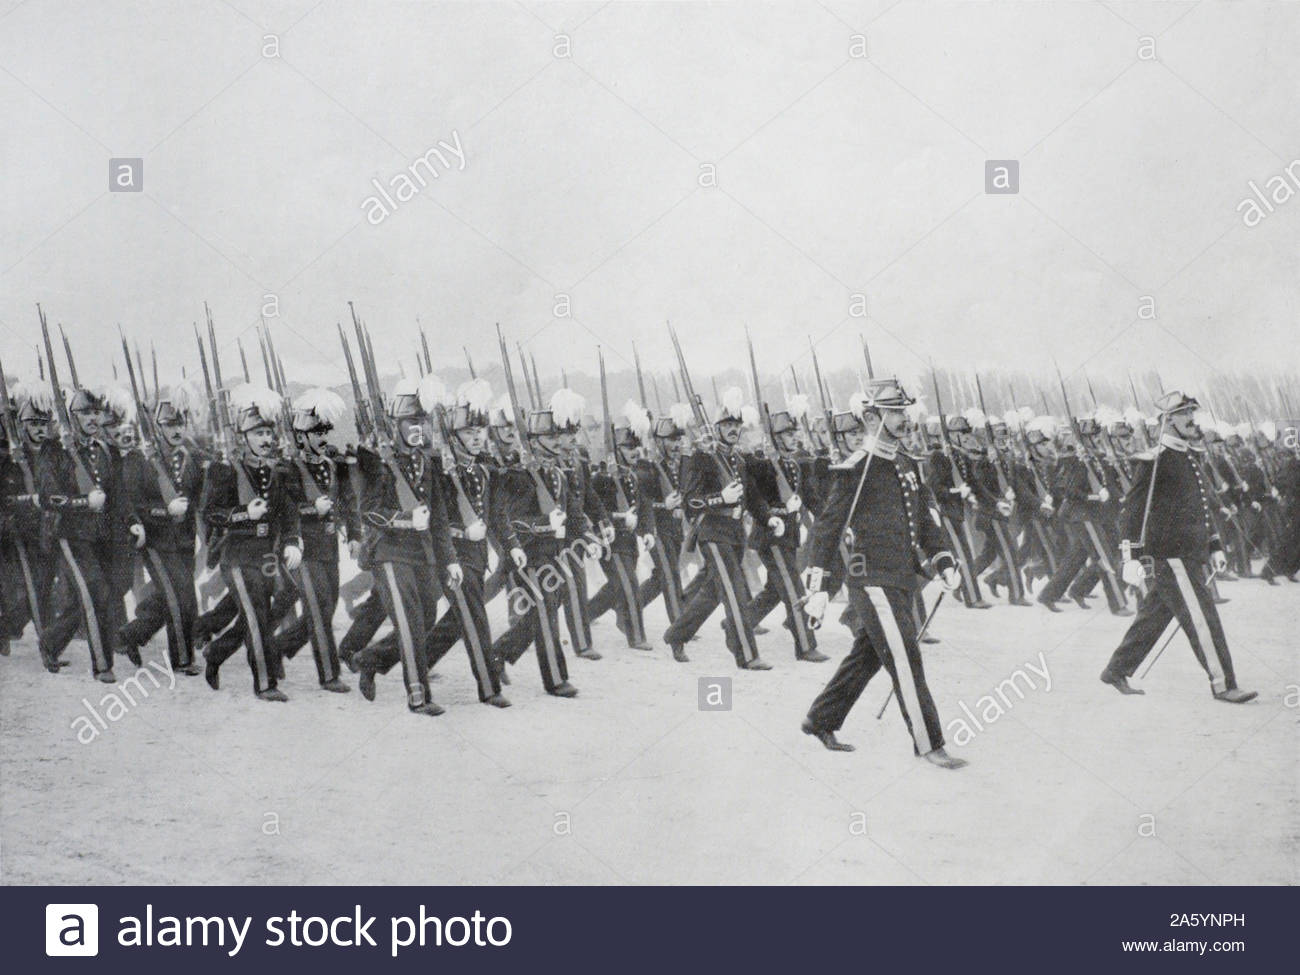 WW1 'Old Guard', pride of the French army marching on Champs de Mars, Paris France, vintage photograph from 1914 Stock Photo